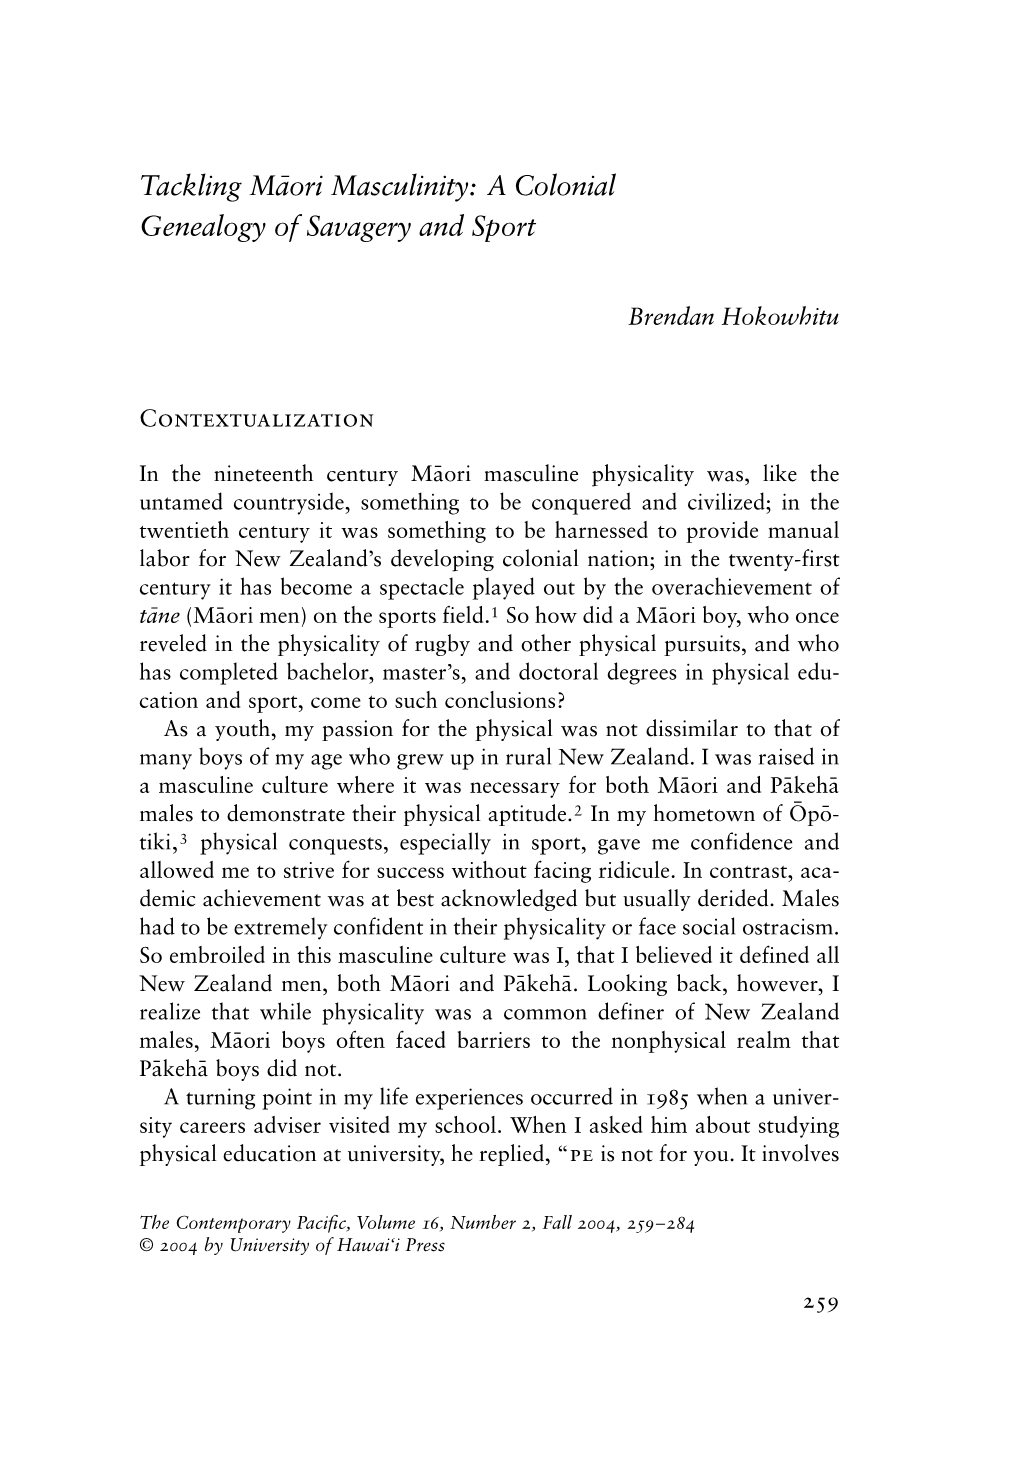 Tackling Mäori Masculinity: a Colonial Genealogy of Savagery and Sport